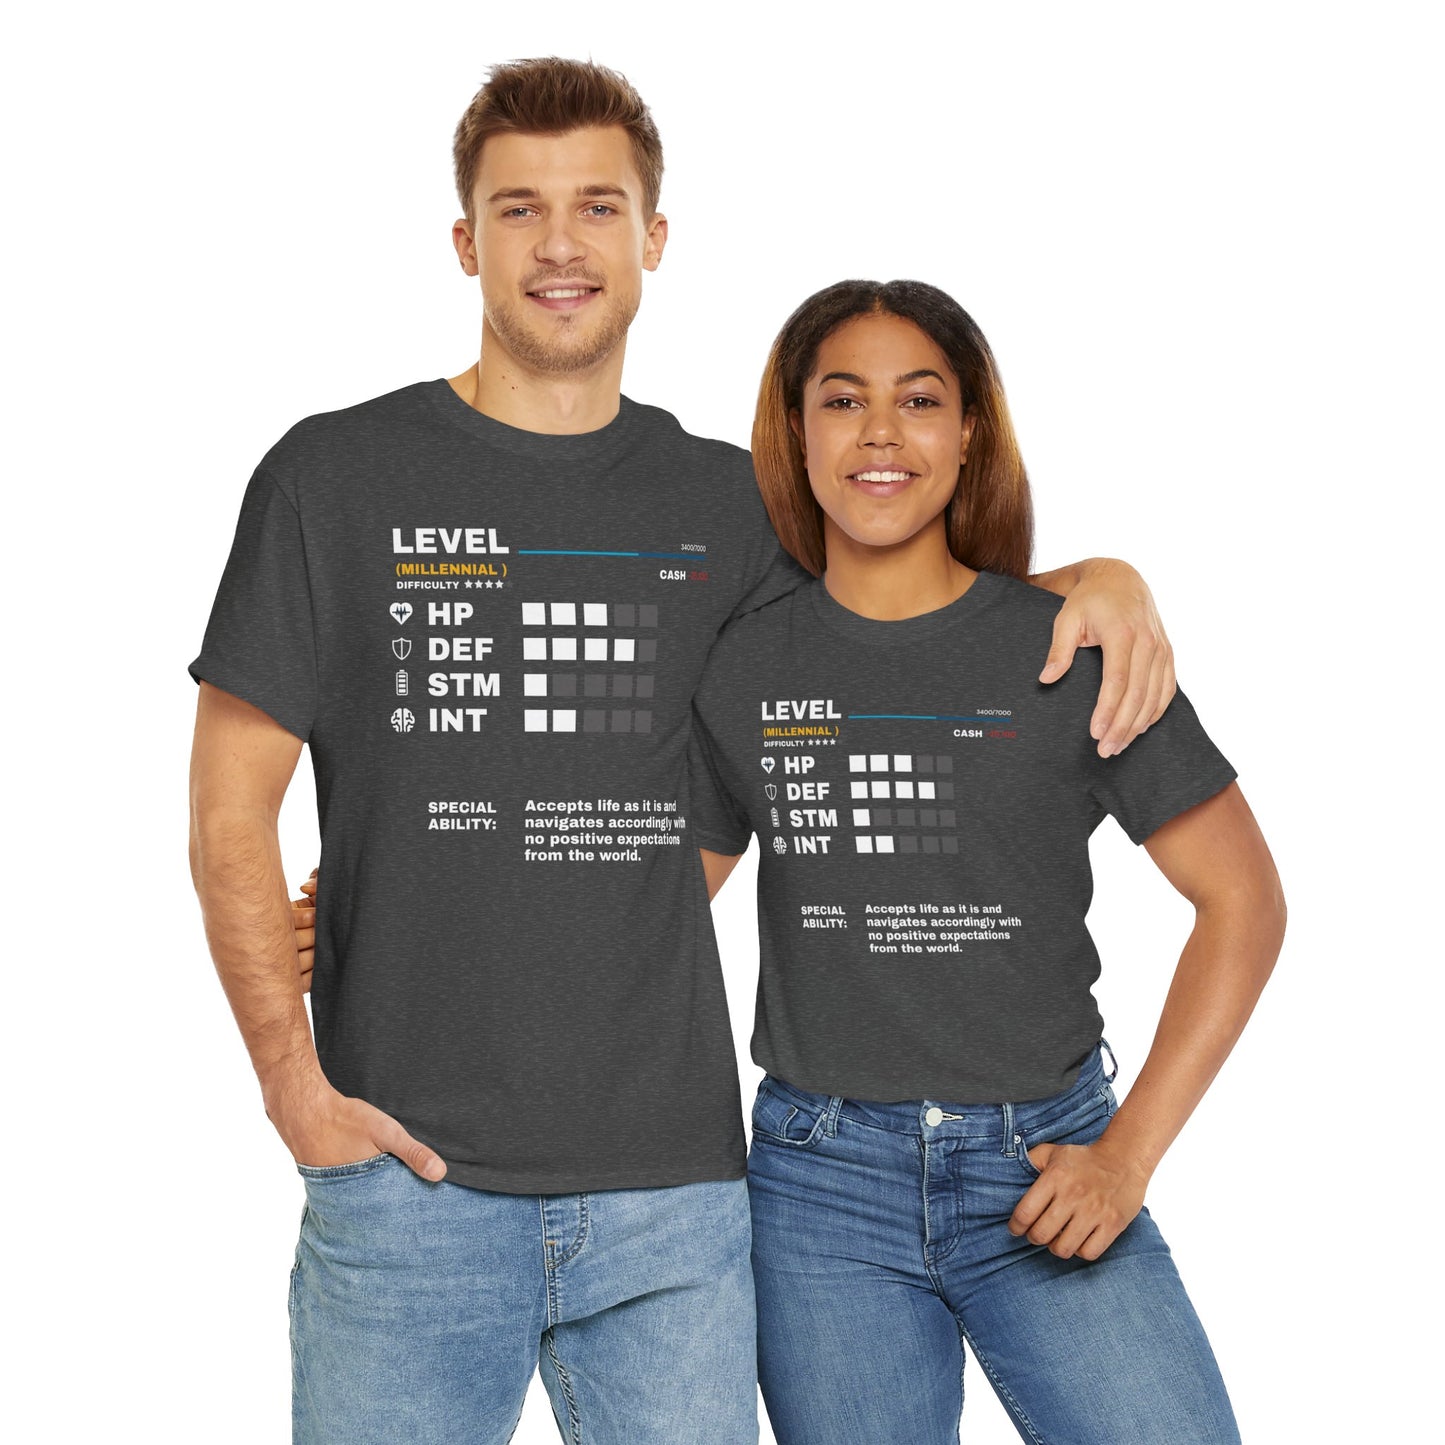 Millennial Quest: Life's Attributes - The Unisex Graphic Tee